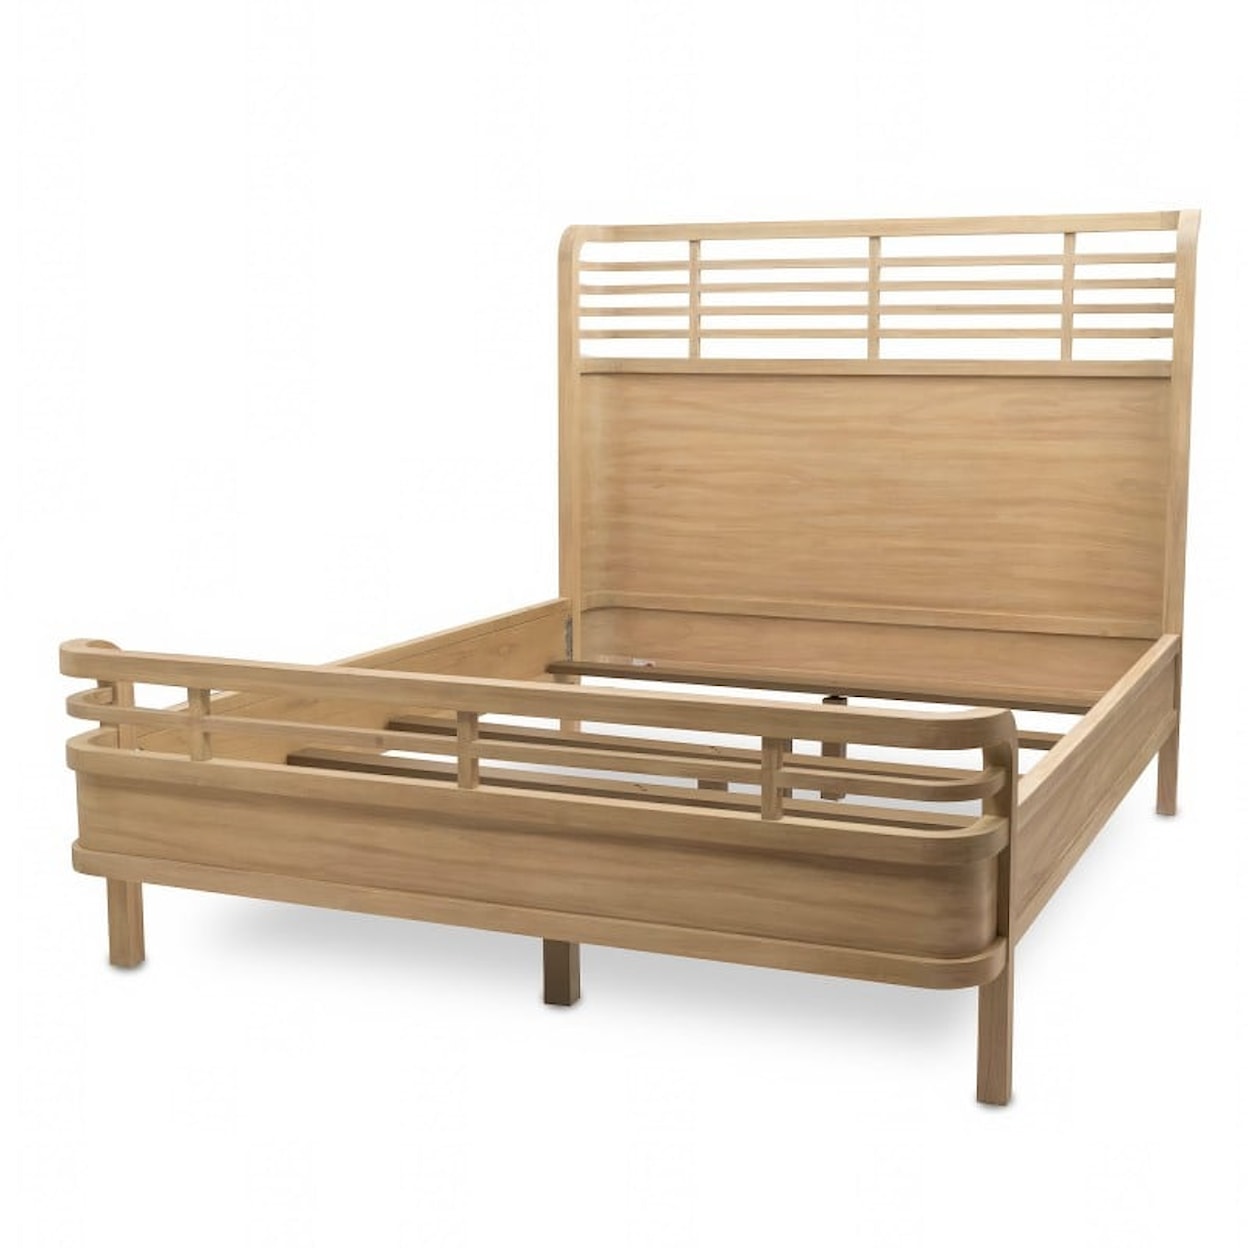 Sea Winds Trading Company Monterey Queen Bed